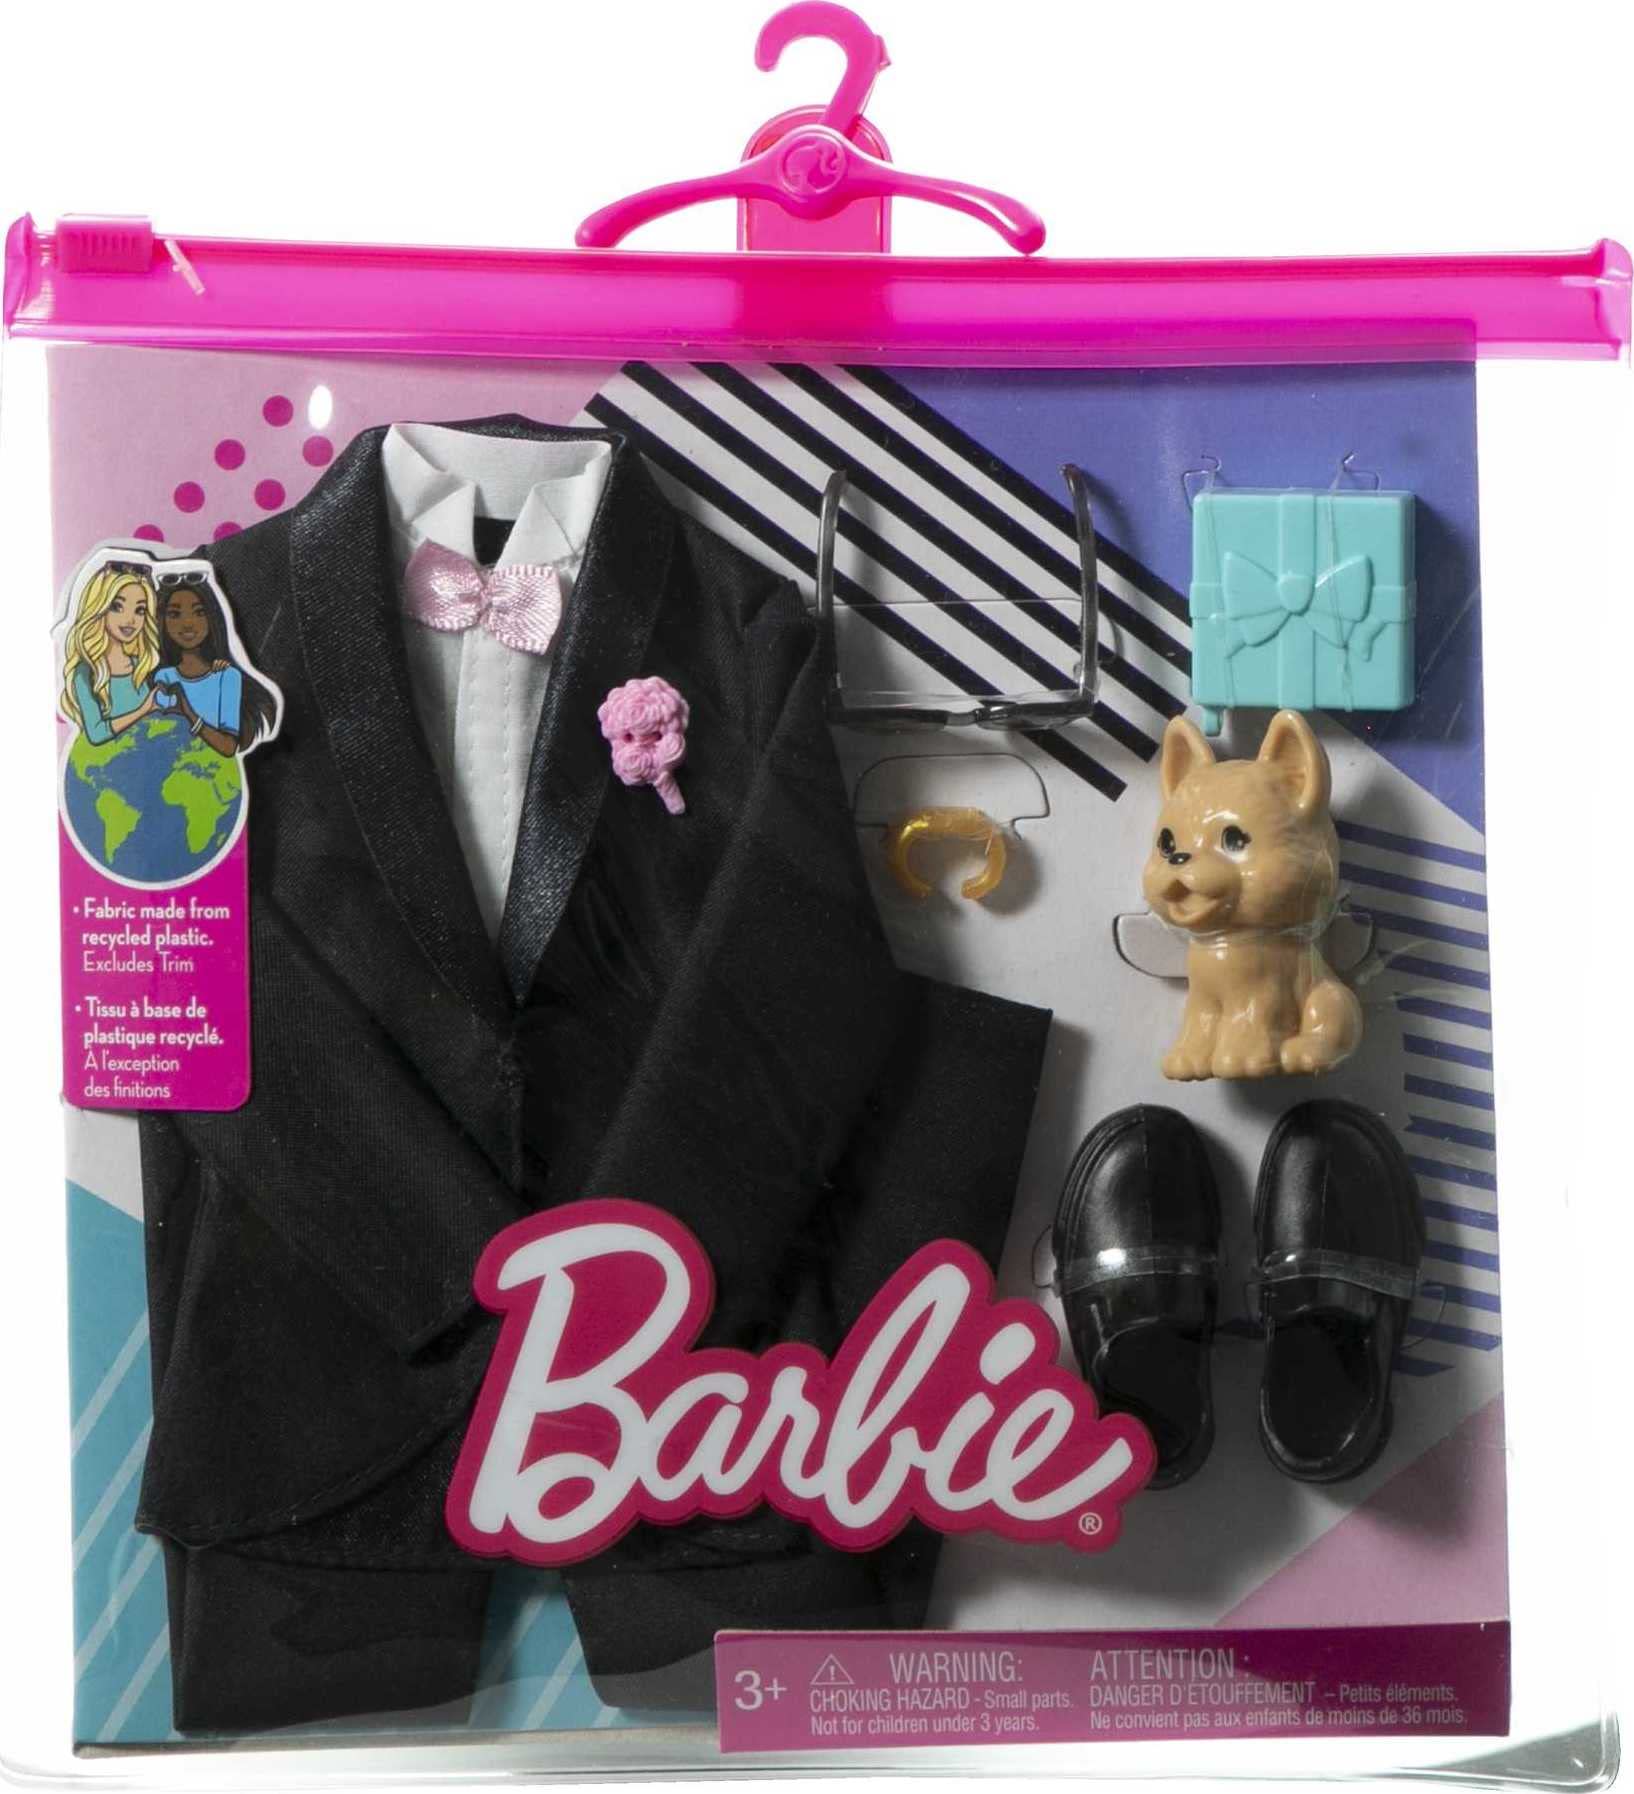 Barbie Fashions Ken Doll Clothes and Accessories Set, Groom On Wedding Day with Tuxedo, Puppy, Sunglasses and More